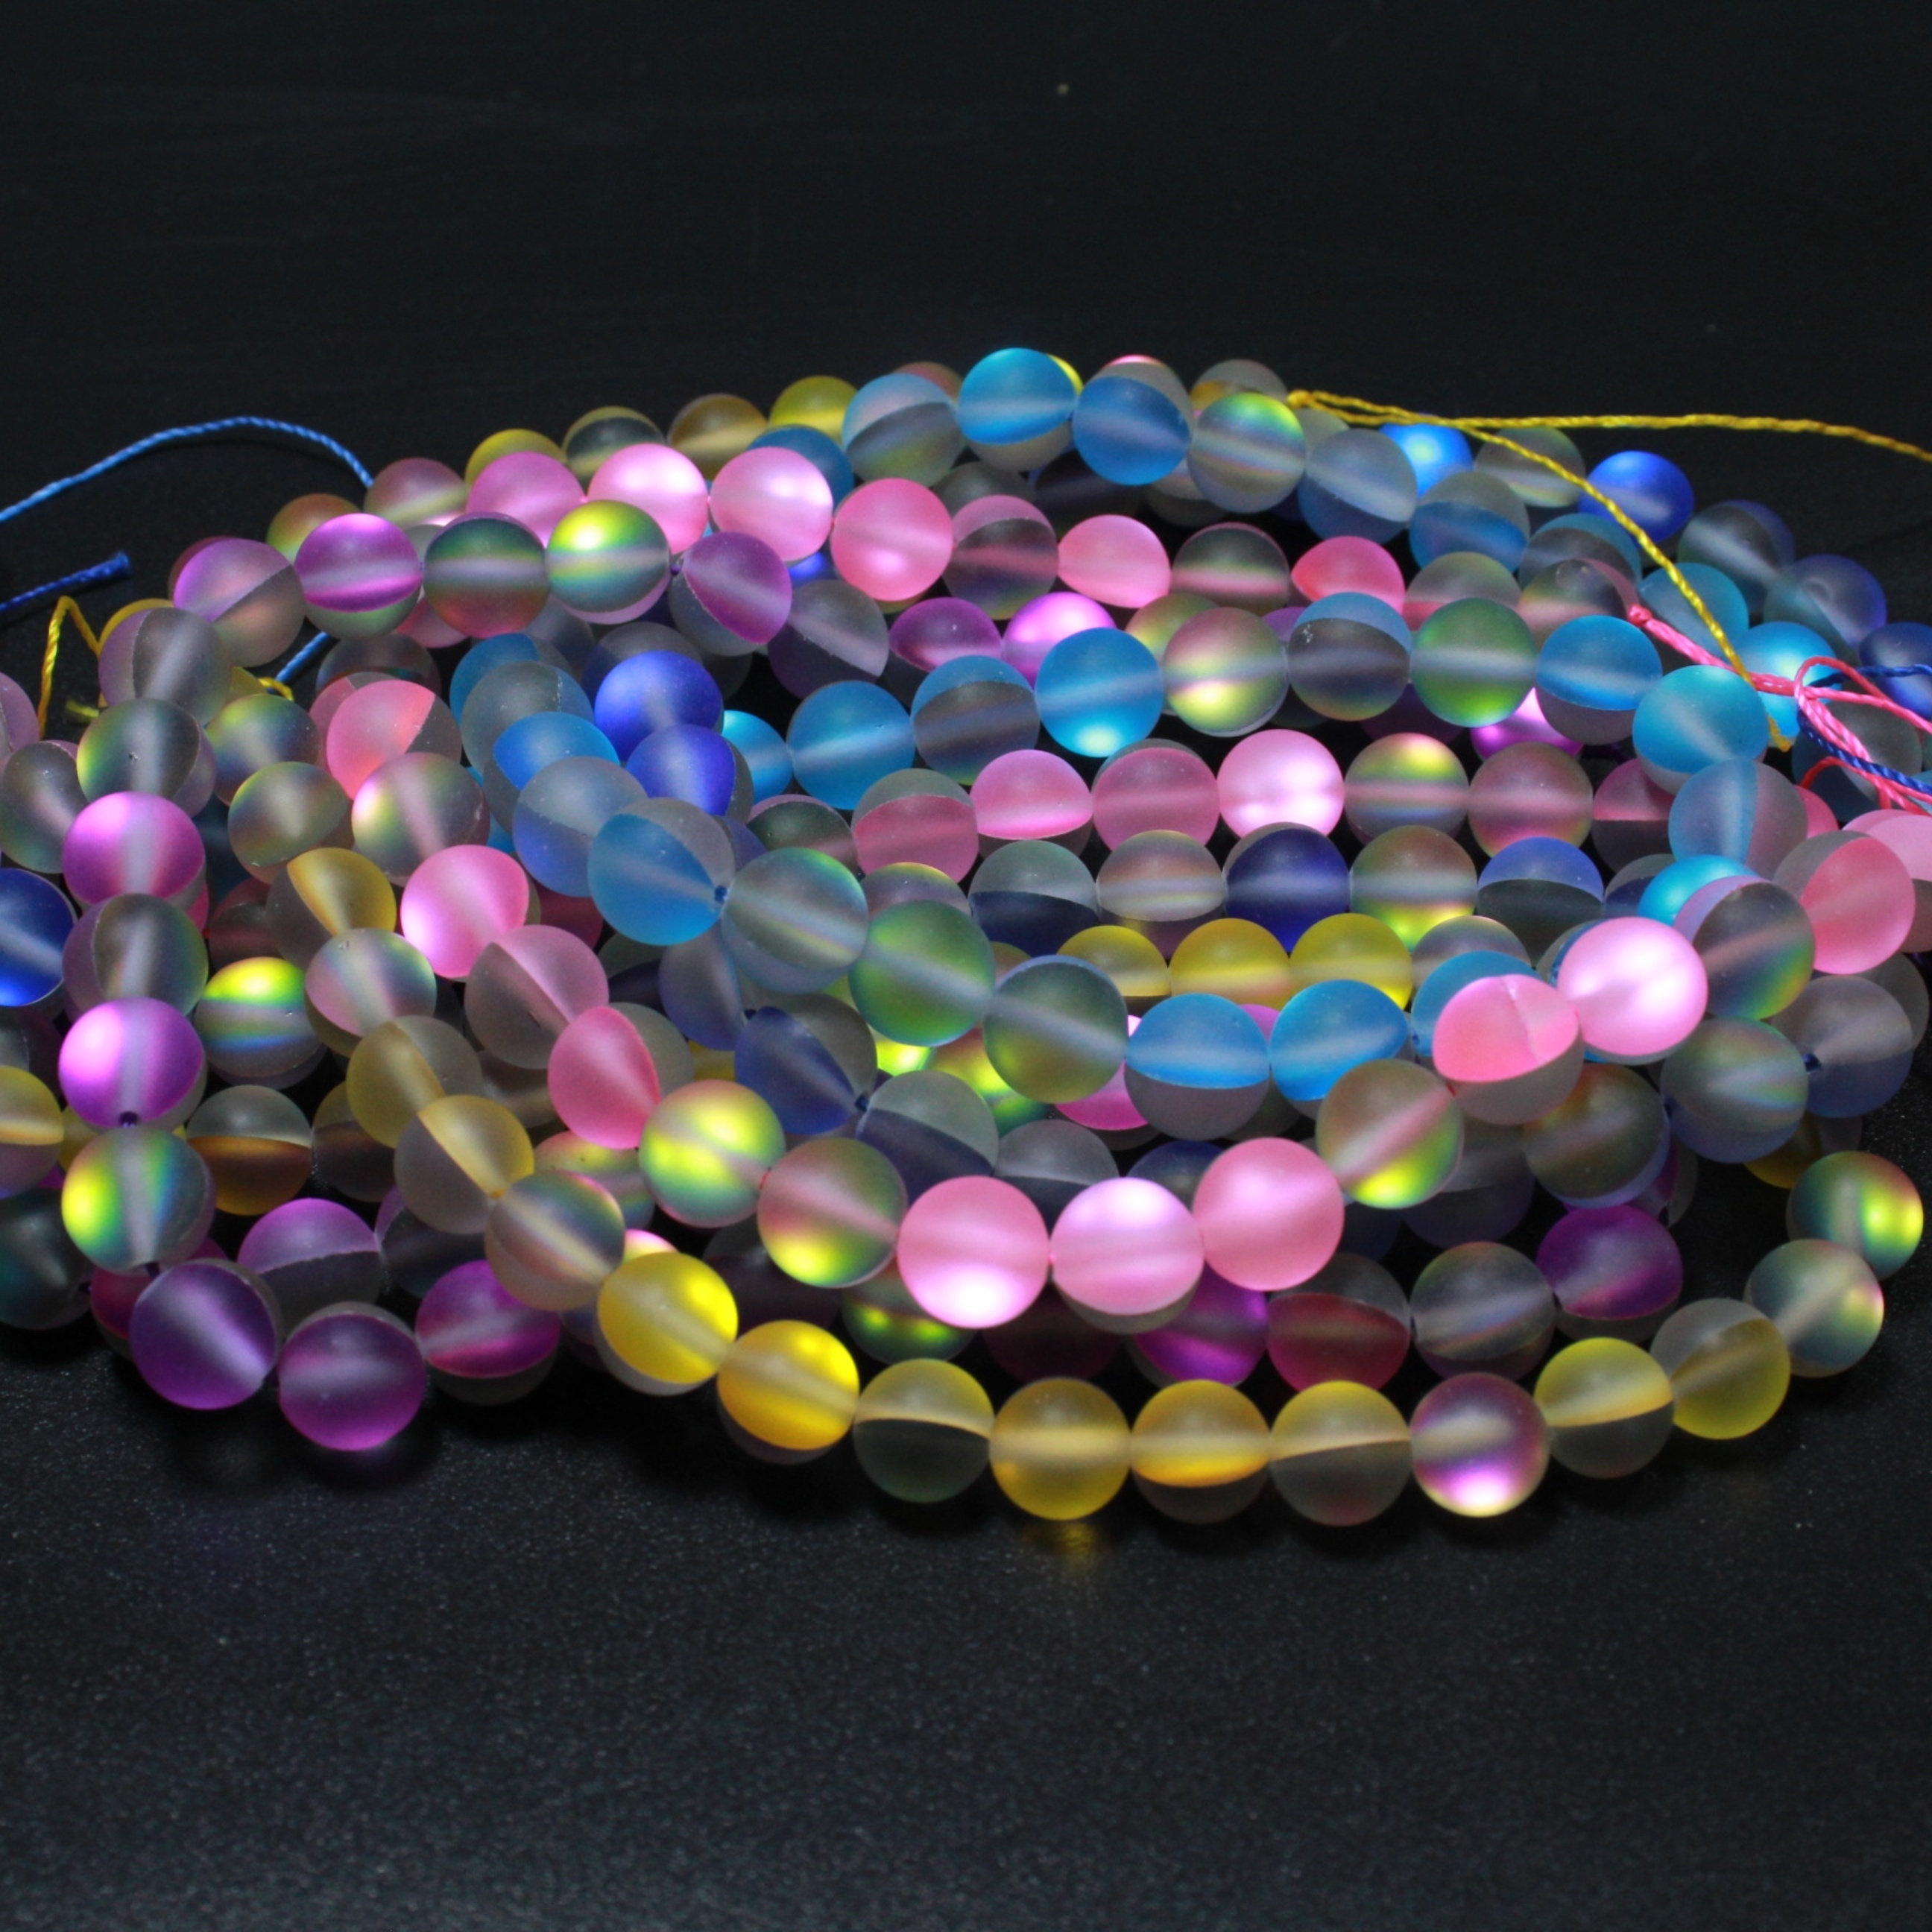 Mermaid Smooth Round Glass Beads, Clear Rainbow Iridescent Mermaid Beads,  Blue Mermaid Beads, 4mm 6mm 8mm 10mm 12mm 